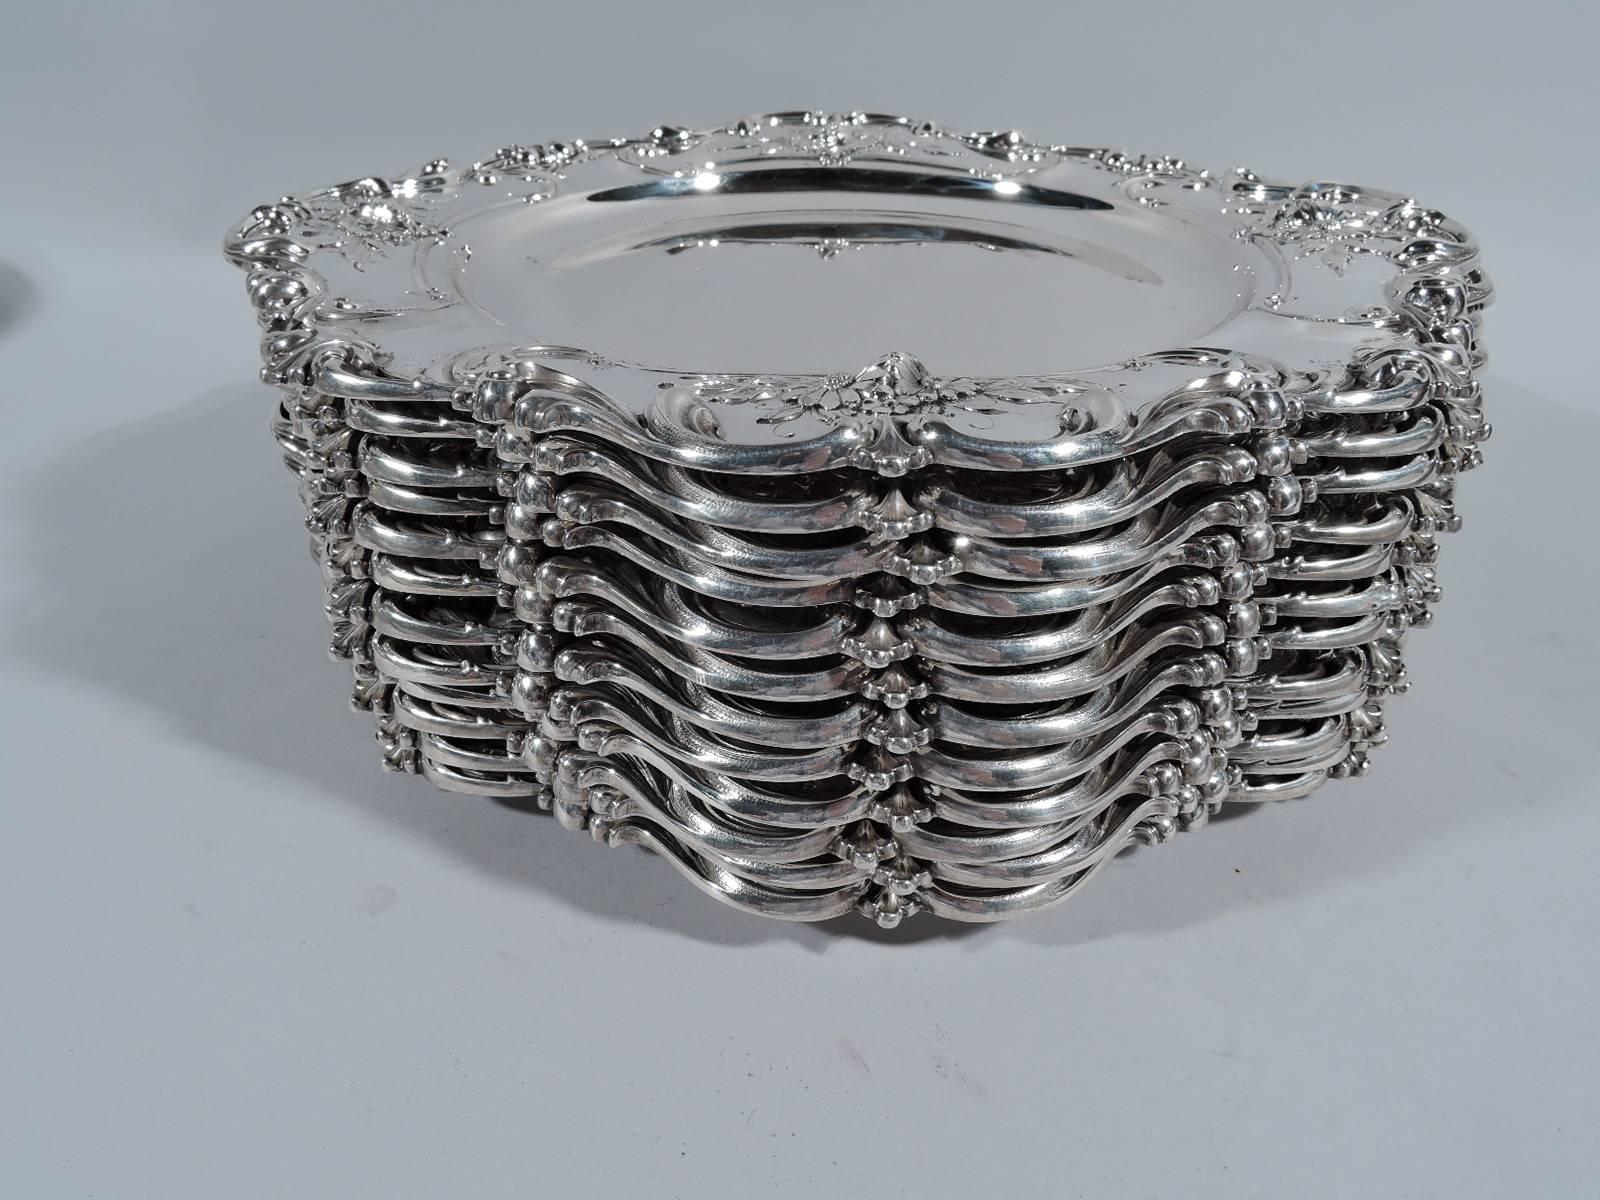 Set of 12 sterling silver chargers. Made by Redlich in New York, circa 1890. Each: plain well and fancy rim with chased and applied scrolls and daisies. A great high-low design that uses a precious metal to represent the humble flower. Hallmark